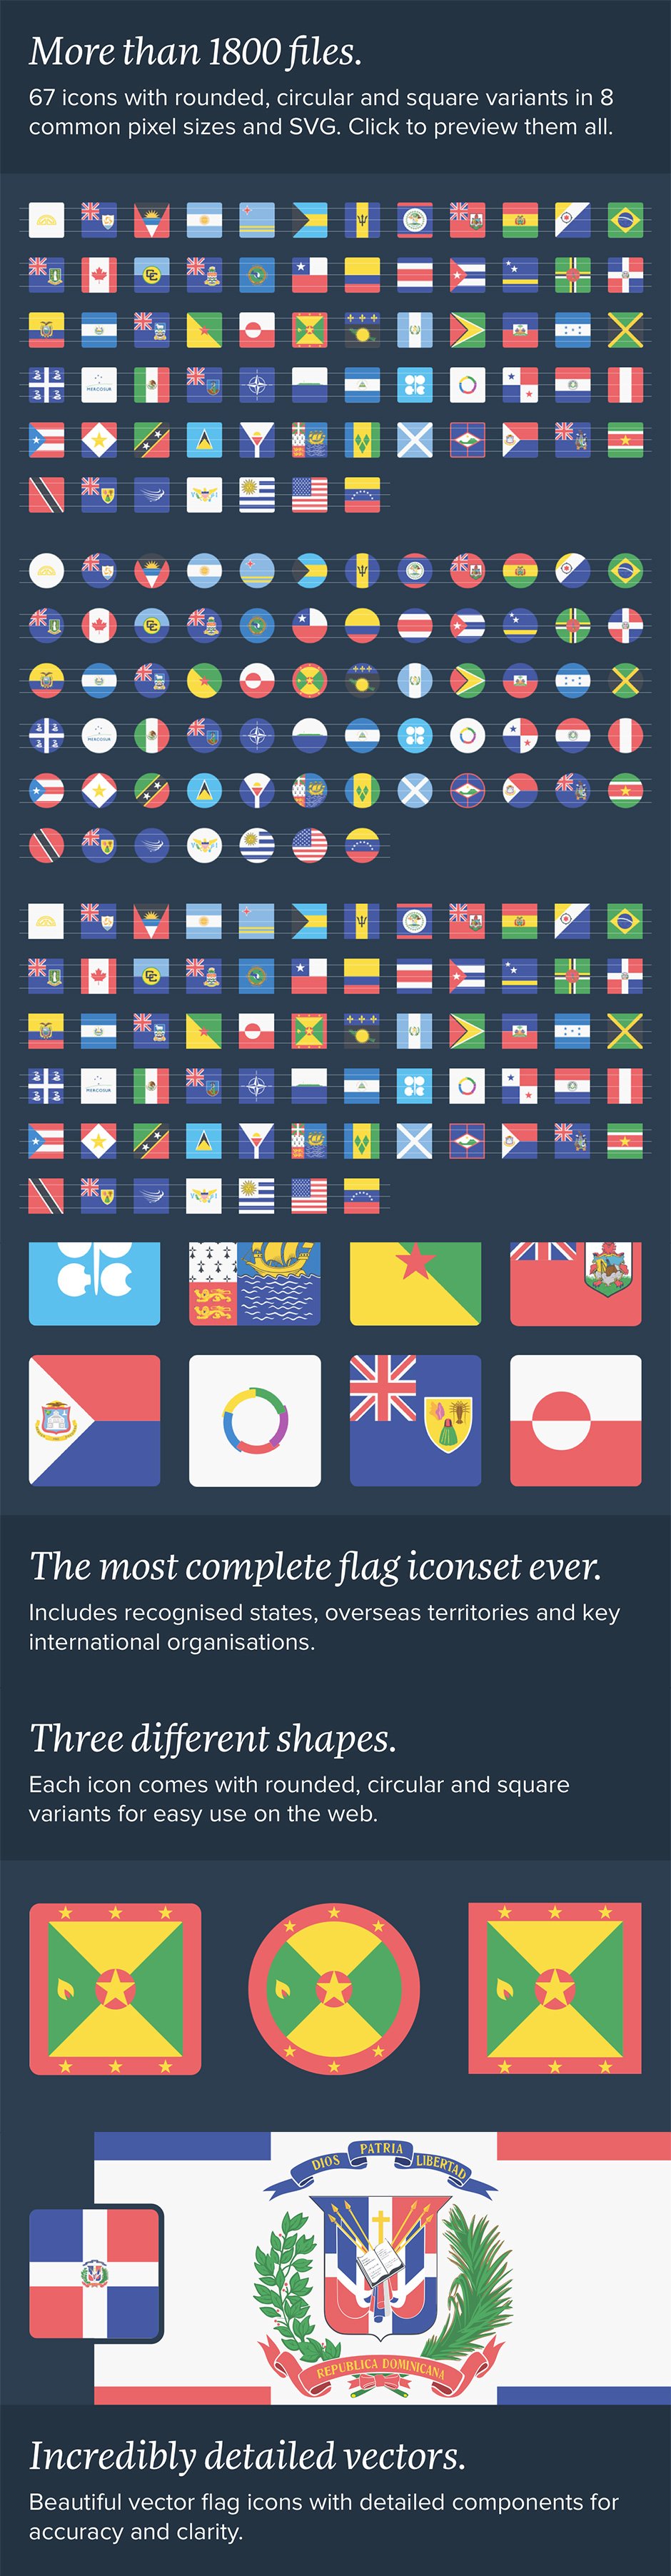 The Flags of the Americas Icon Set